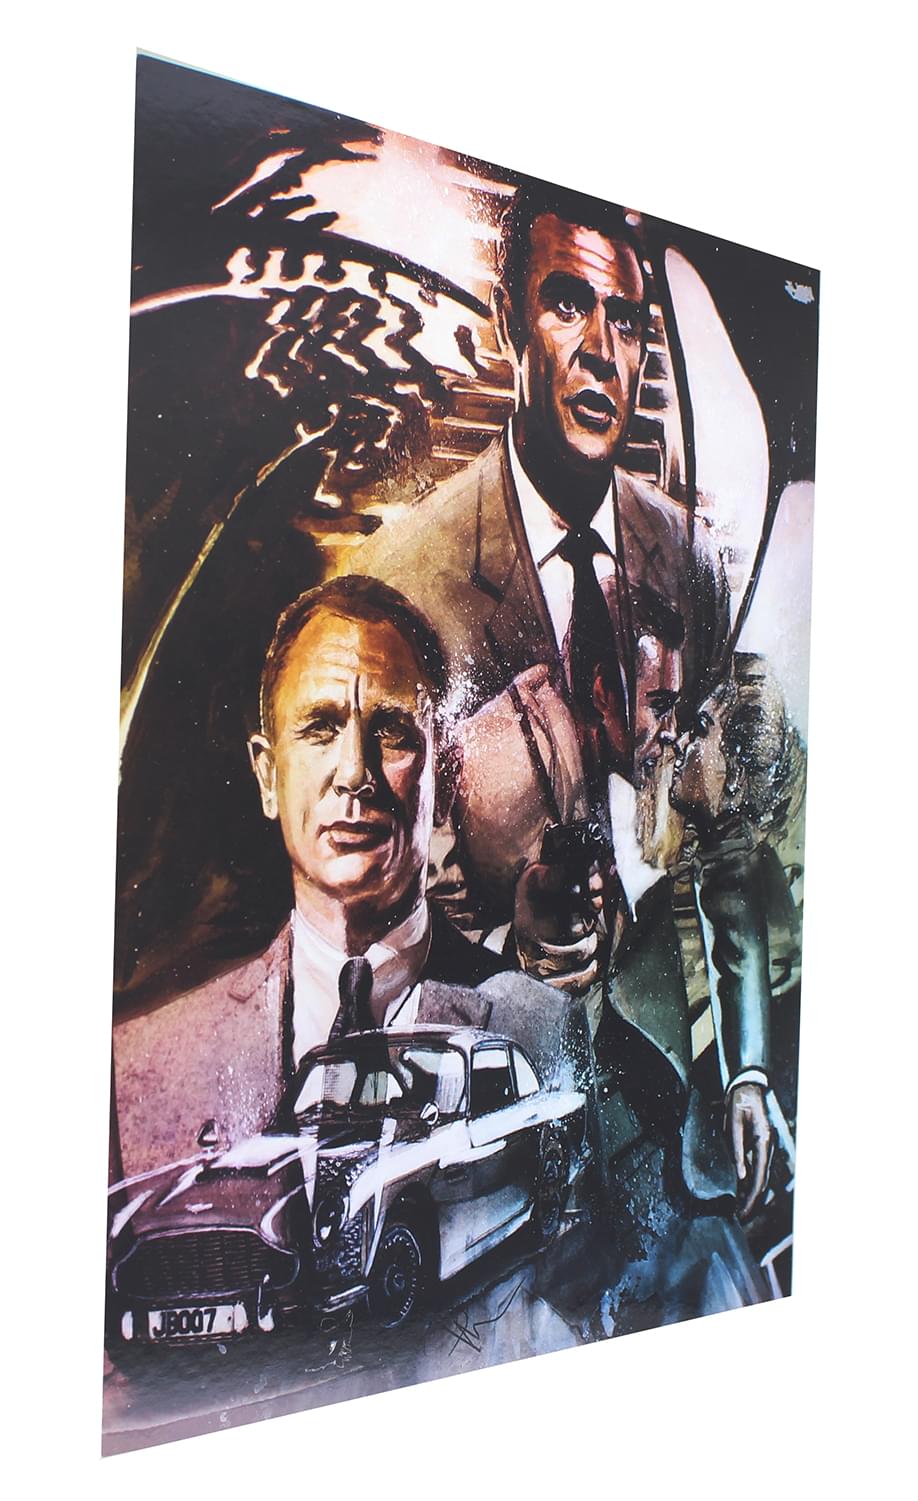 James Bond 007 Limited Edition 8x10 Inch Art Print by Rob Prior